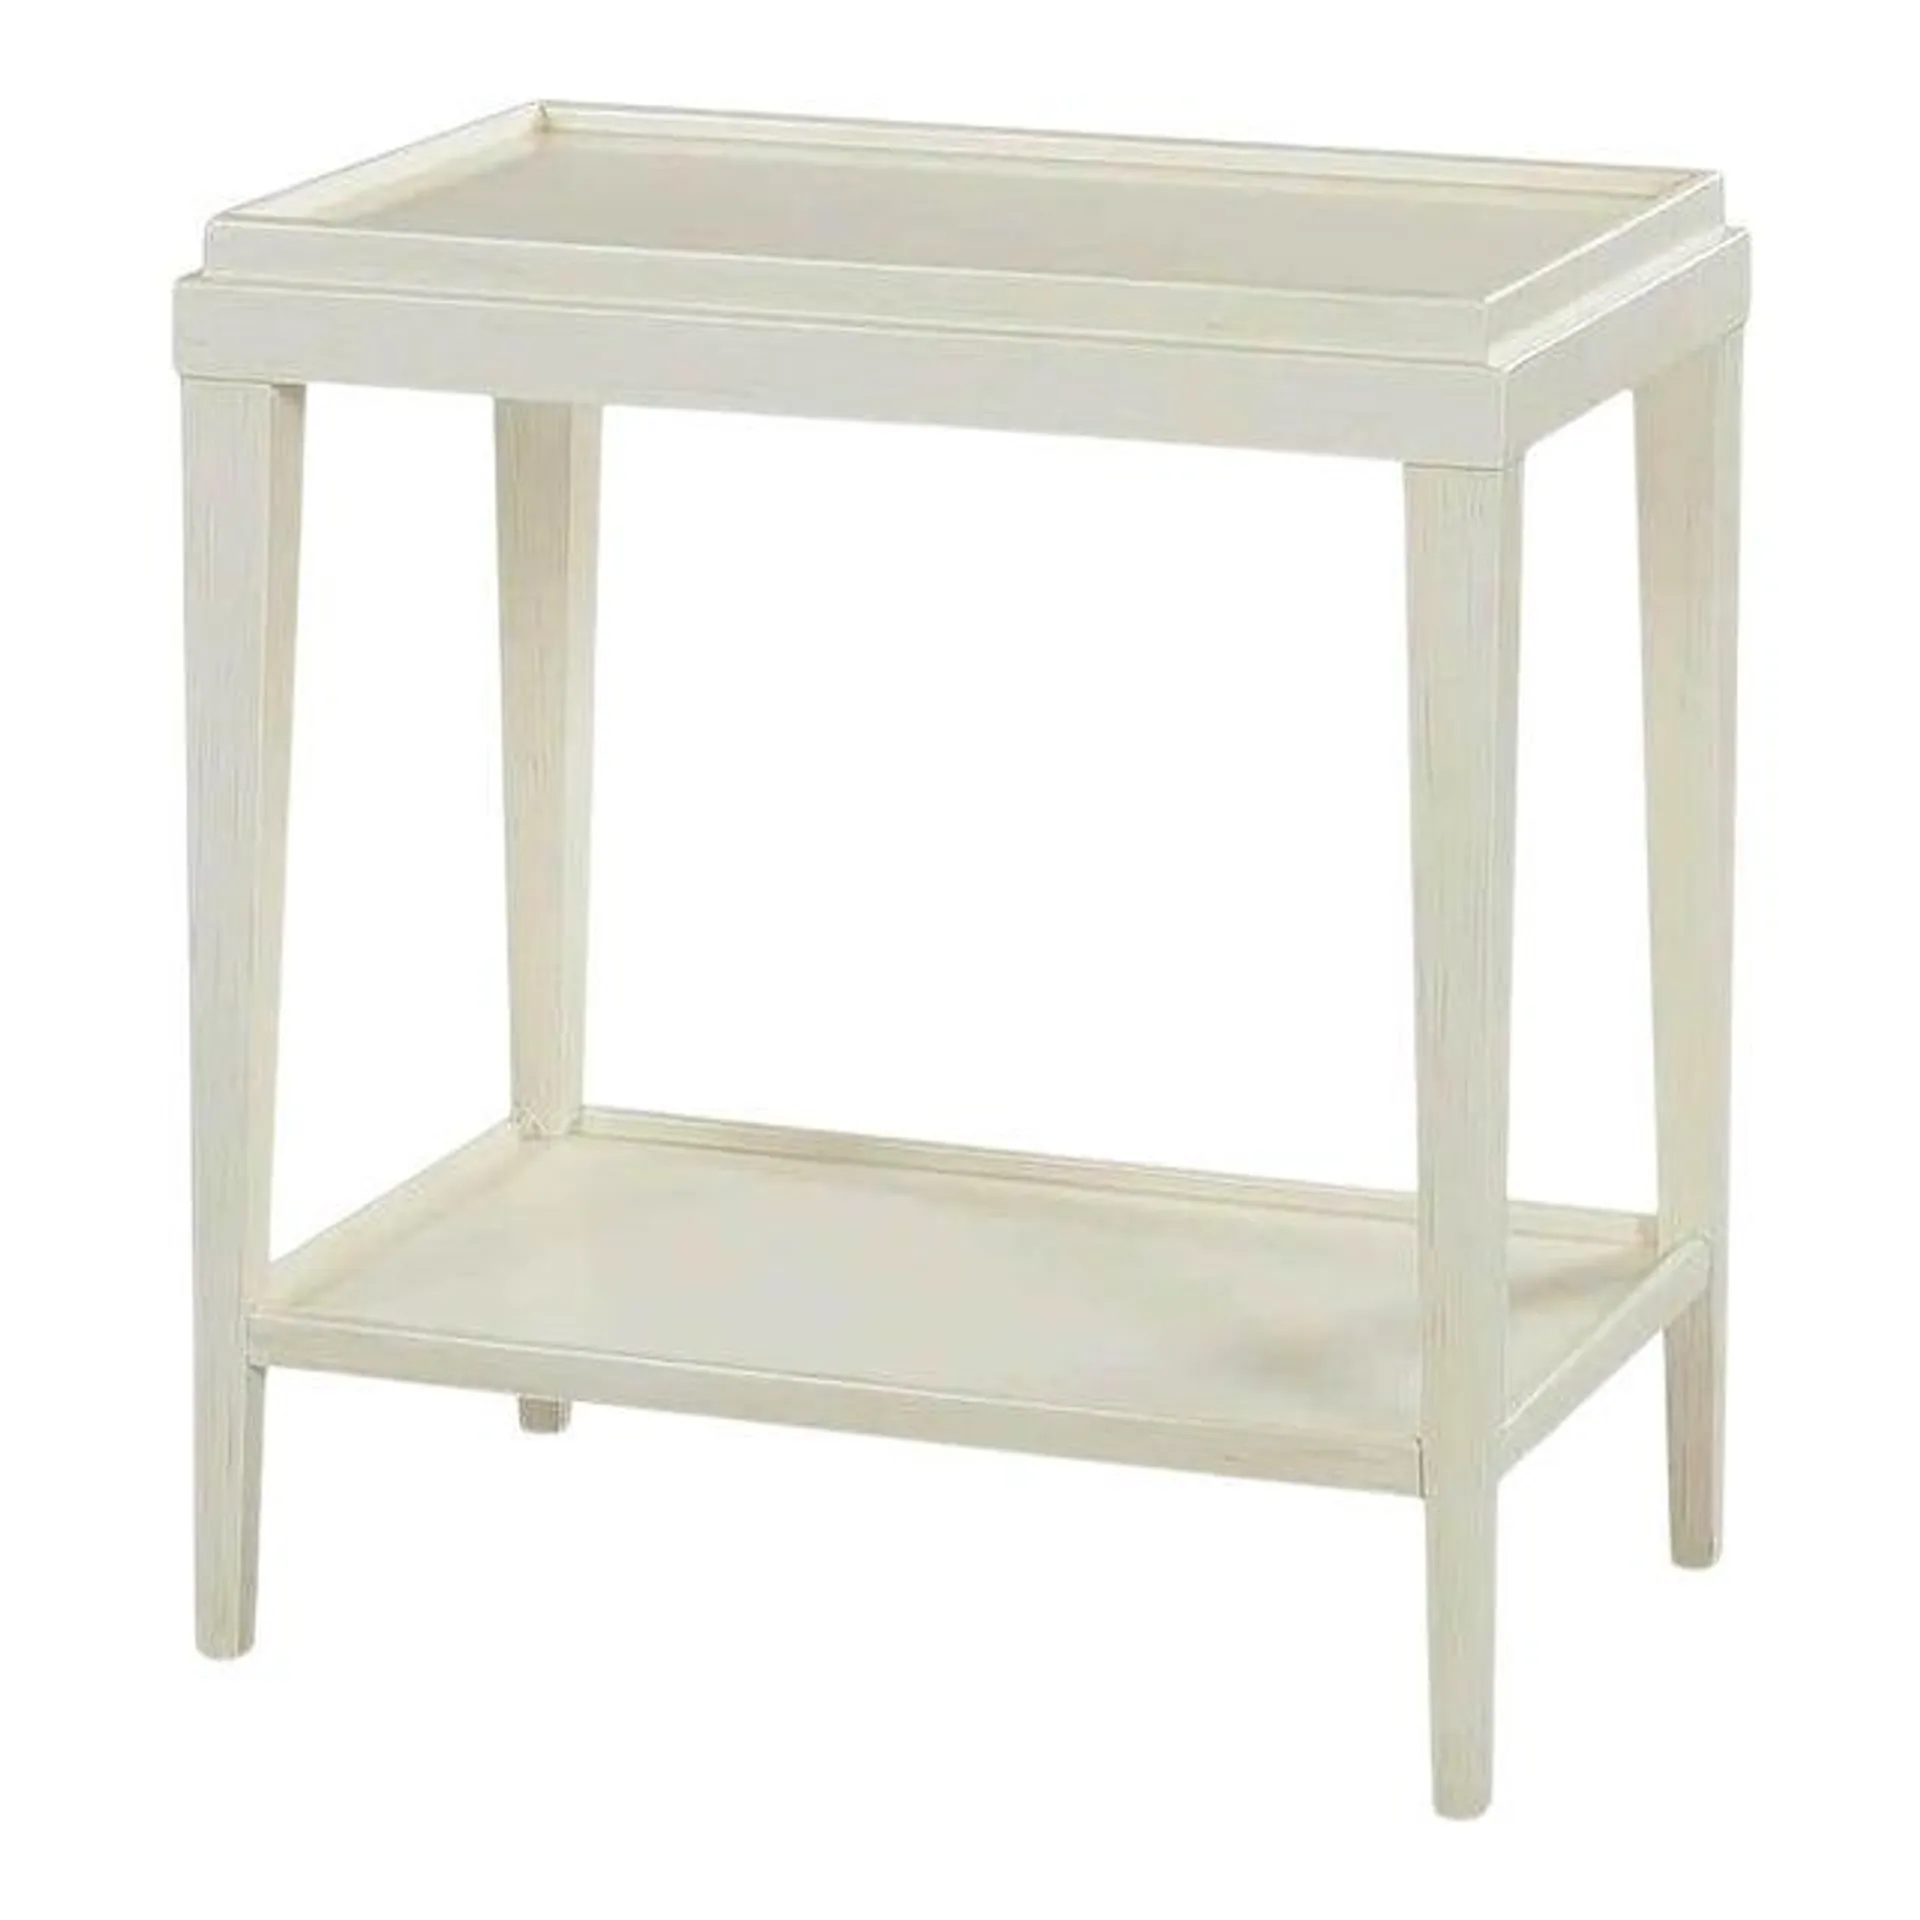 Classic Drift White Two-Tier Side Table